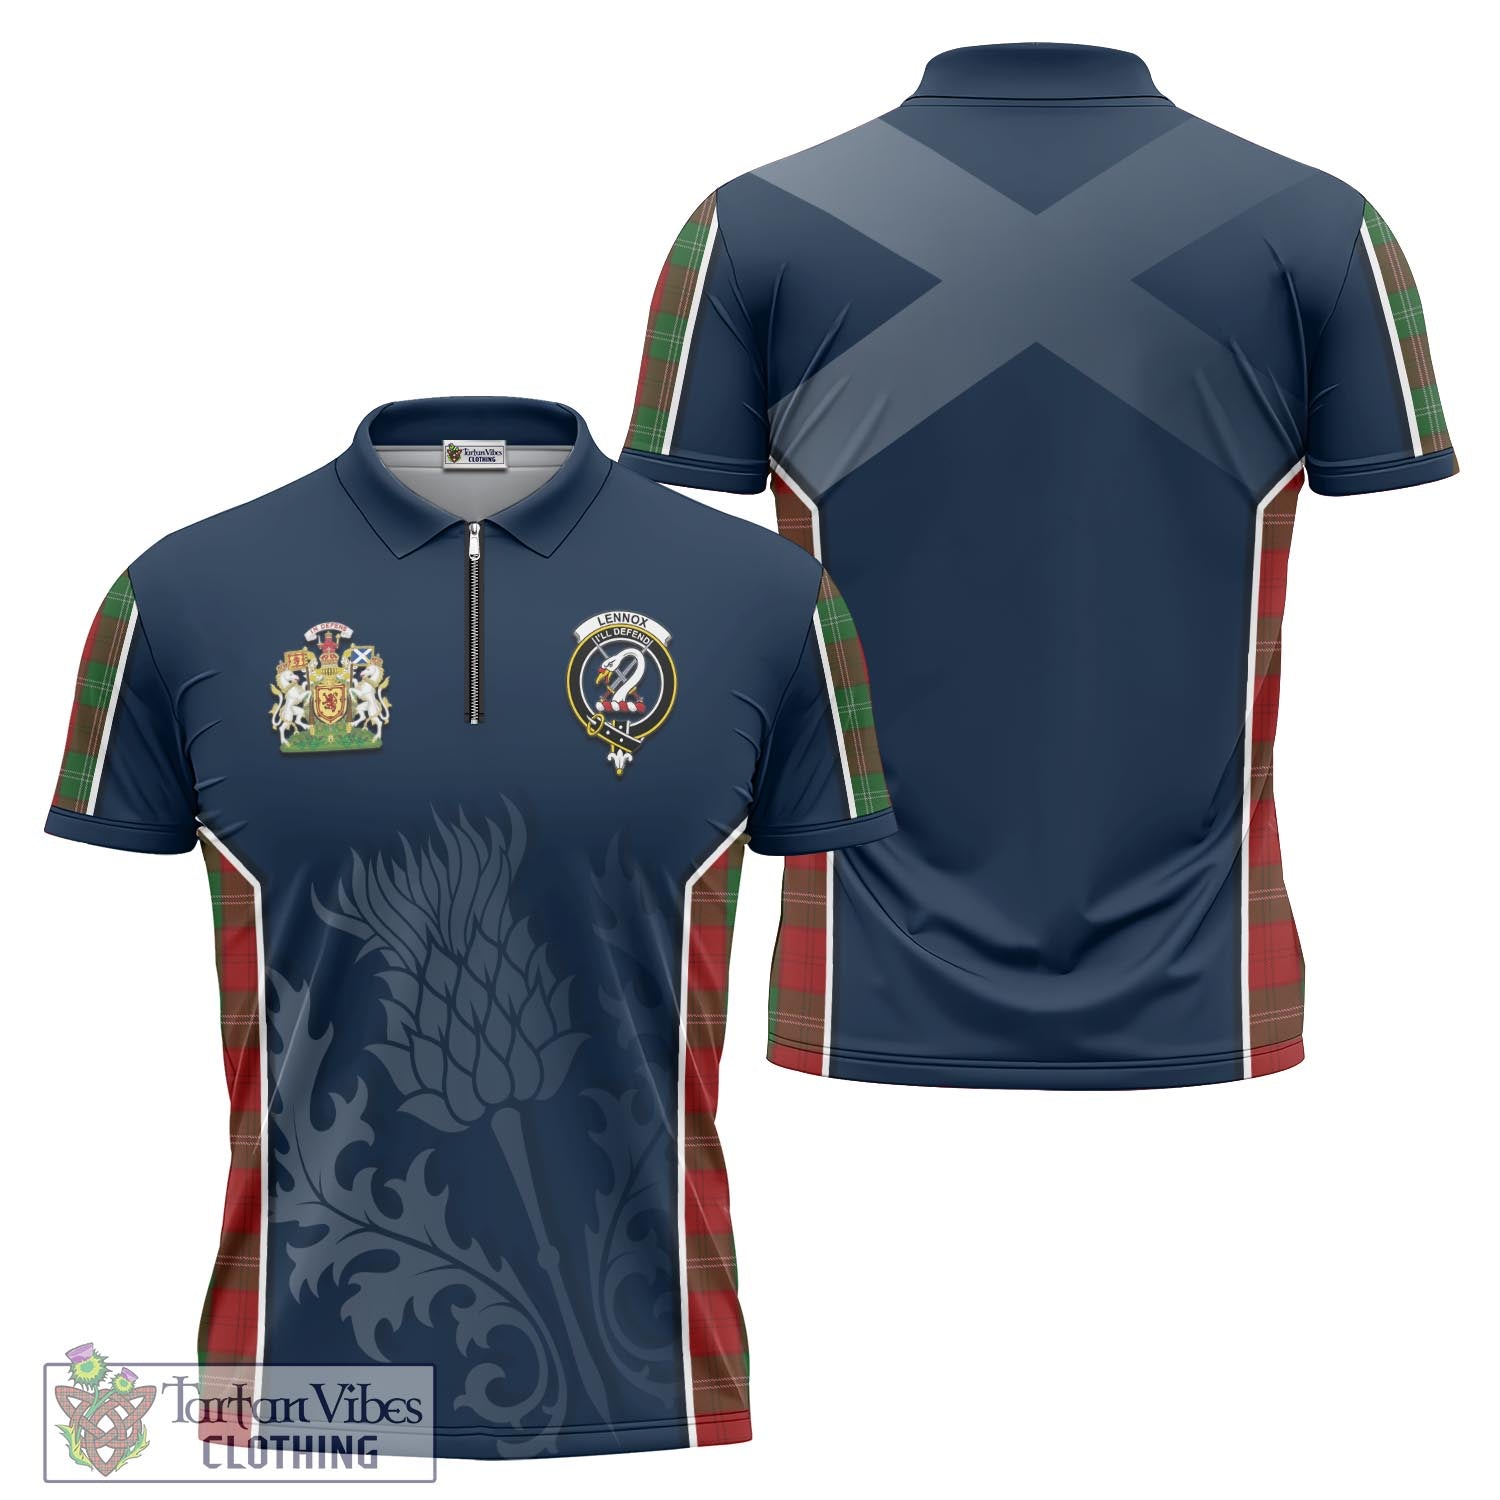 Tartan Vibes Clothing Lennox Tartan Zipper Polo Shirt with Family Crest and Scottish Thistle Vibes Sport Style